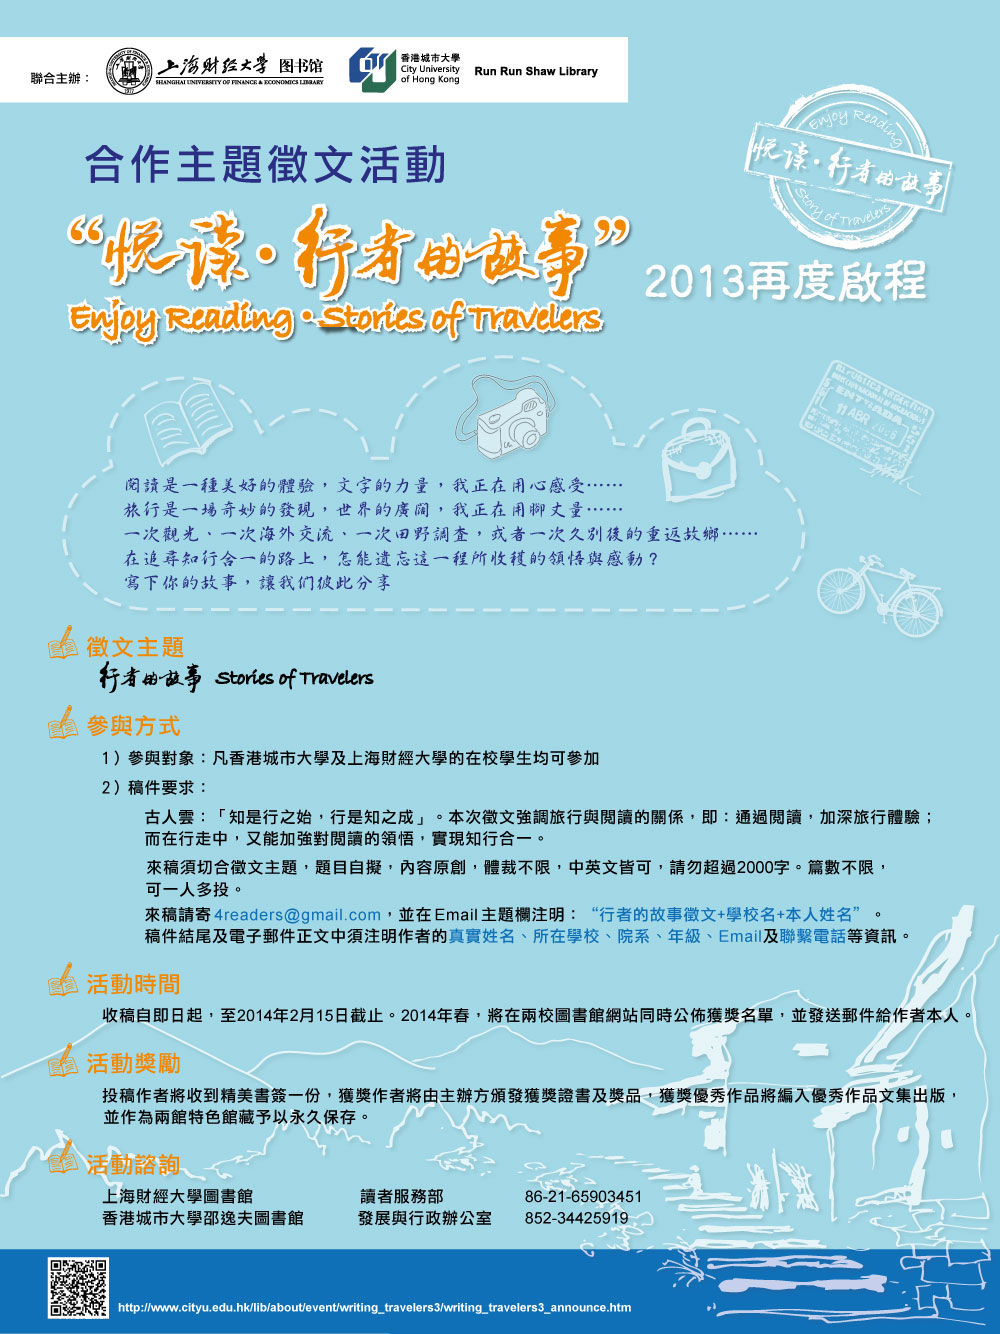 The 3rd 'Enjoy Reading • Stories of Travelers' Writing Competition 「悅讀 • 行者的故事」第三期徵文比賽